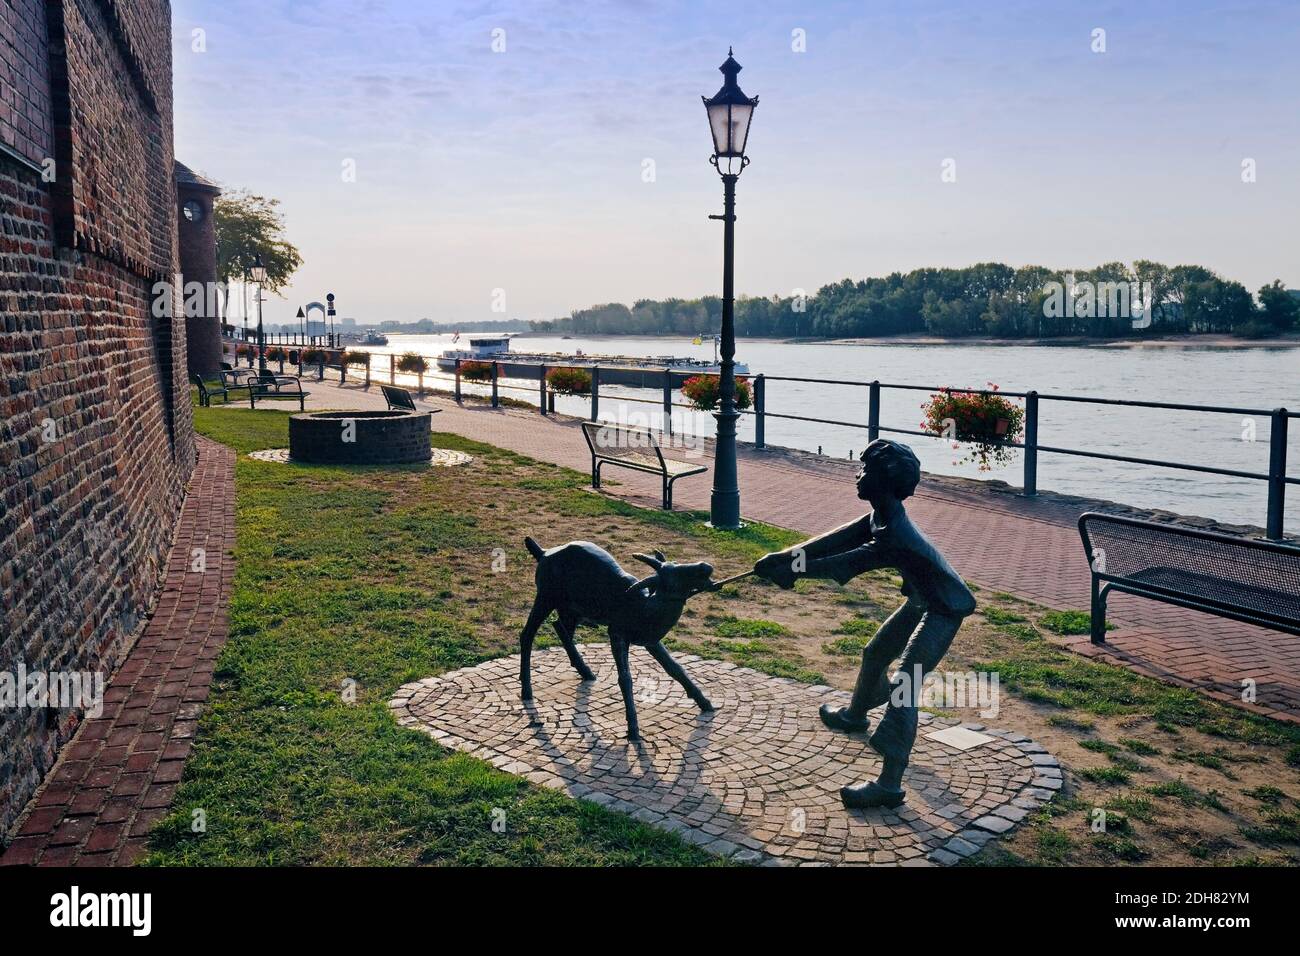 bronze sculpture 'goat' at the Rhine promenade in Rees, inland vessel in the background, Germany, North Rhine-Westphalia, Lower Rhine, Rees Stock Photo